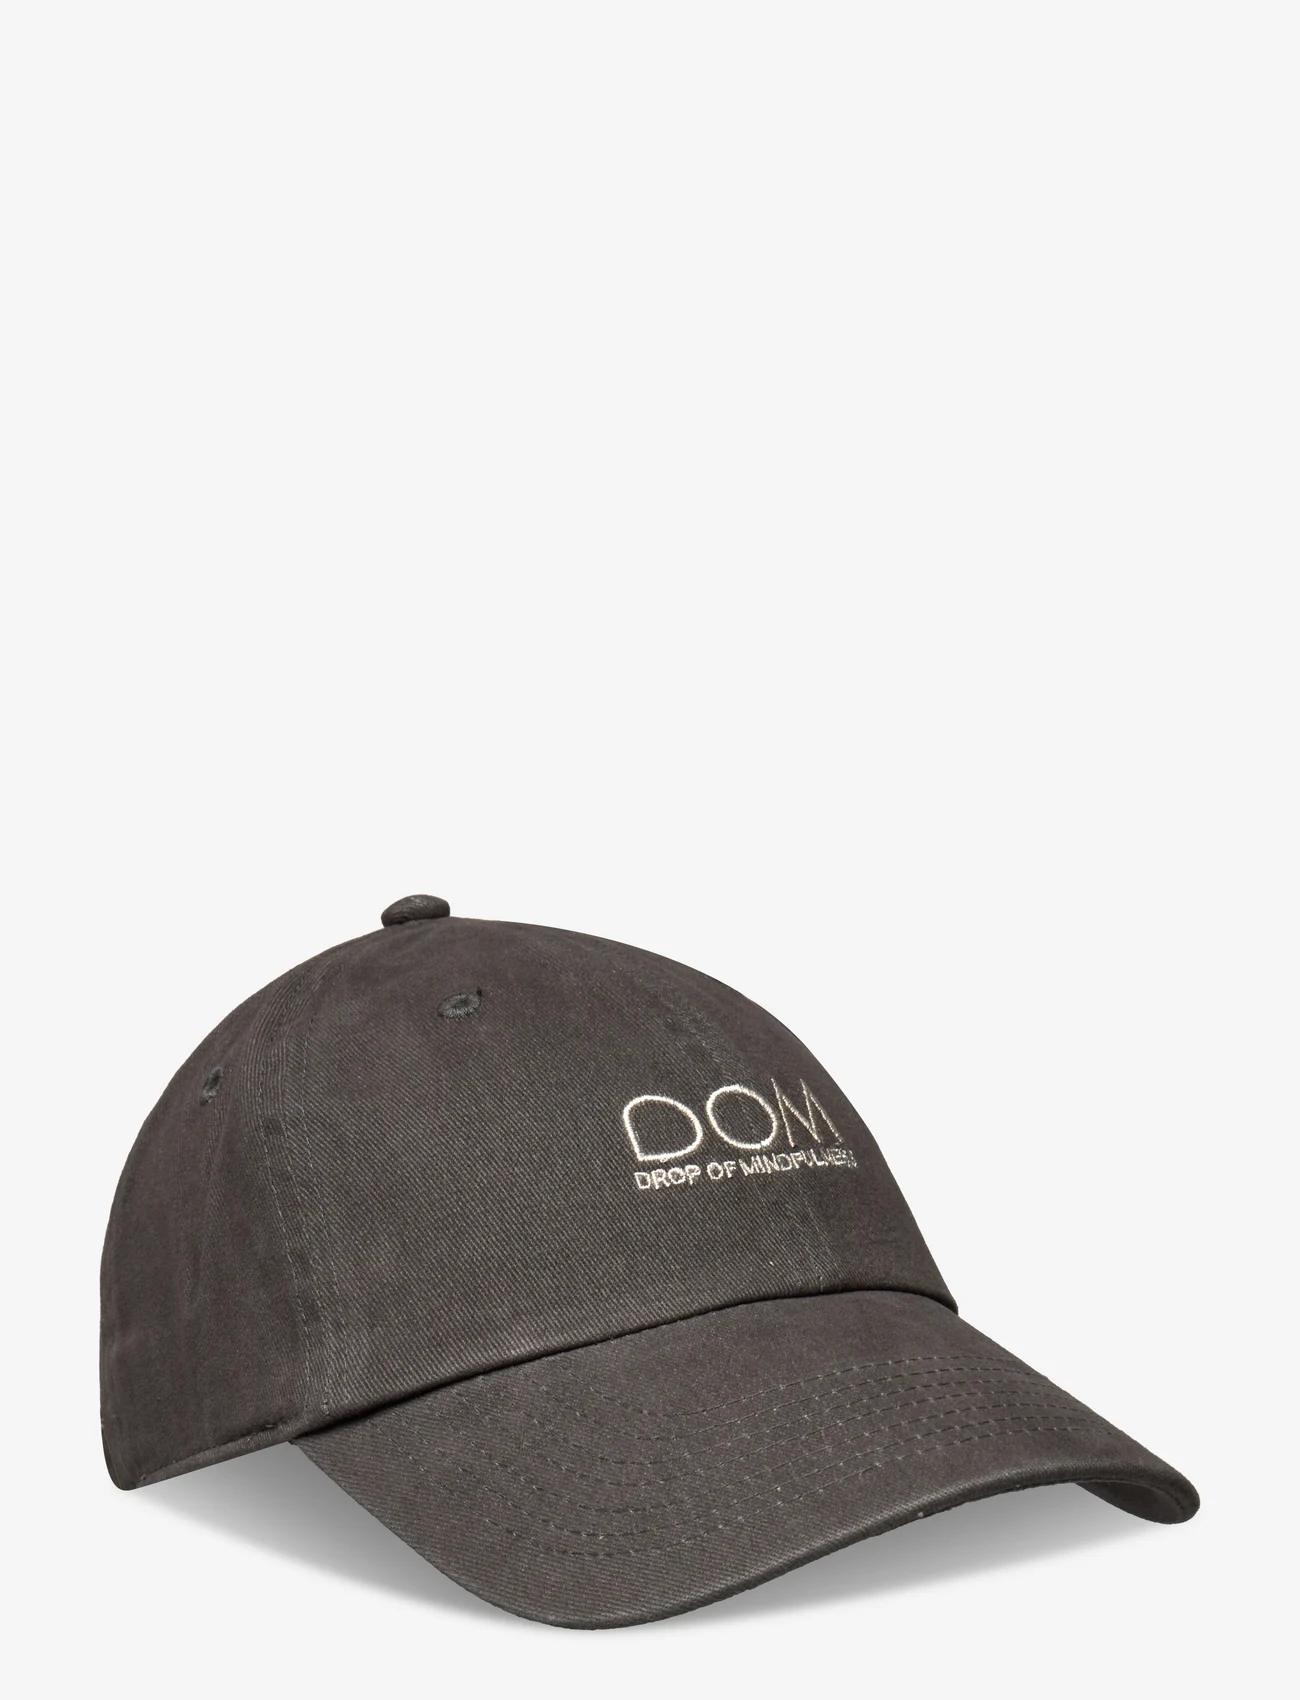 Drop of Mindfulness - ACTIVE LIFESTYLE CAP - slate grey - 0